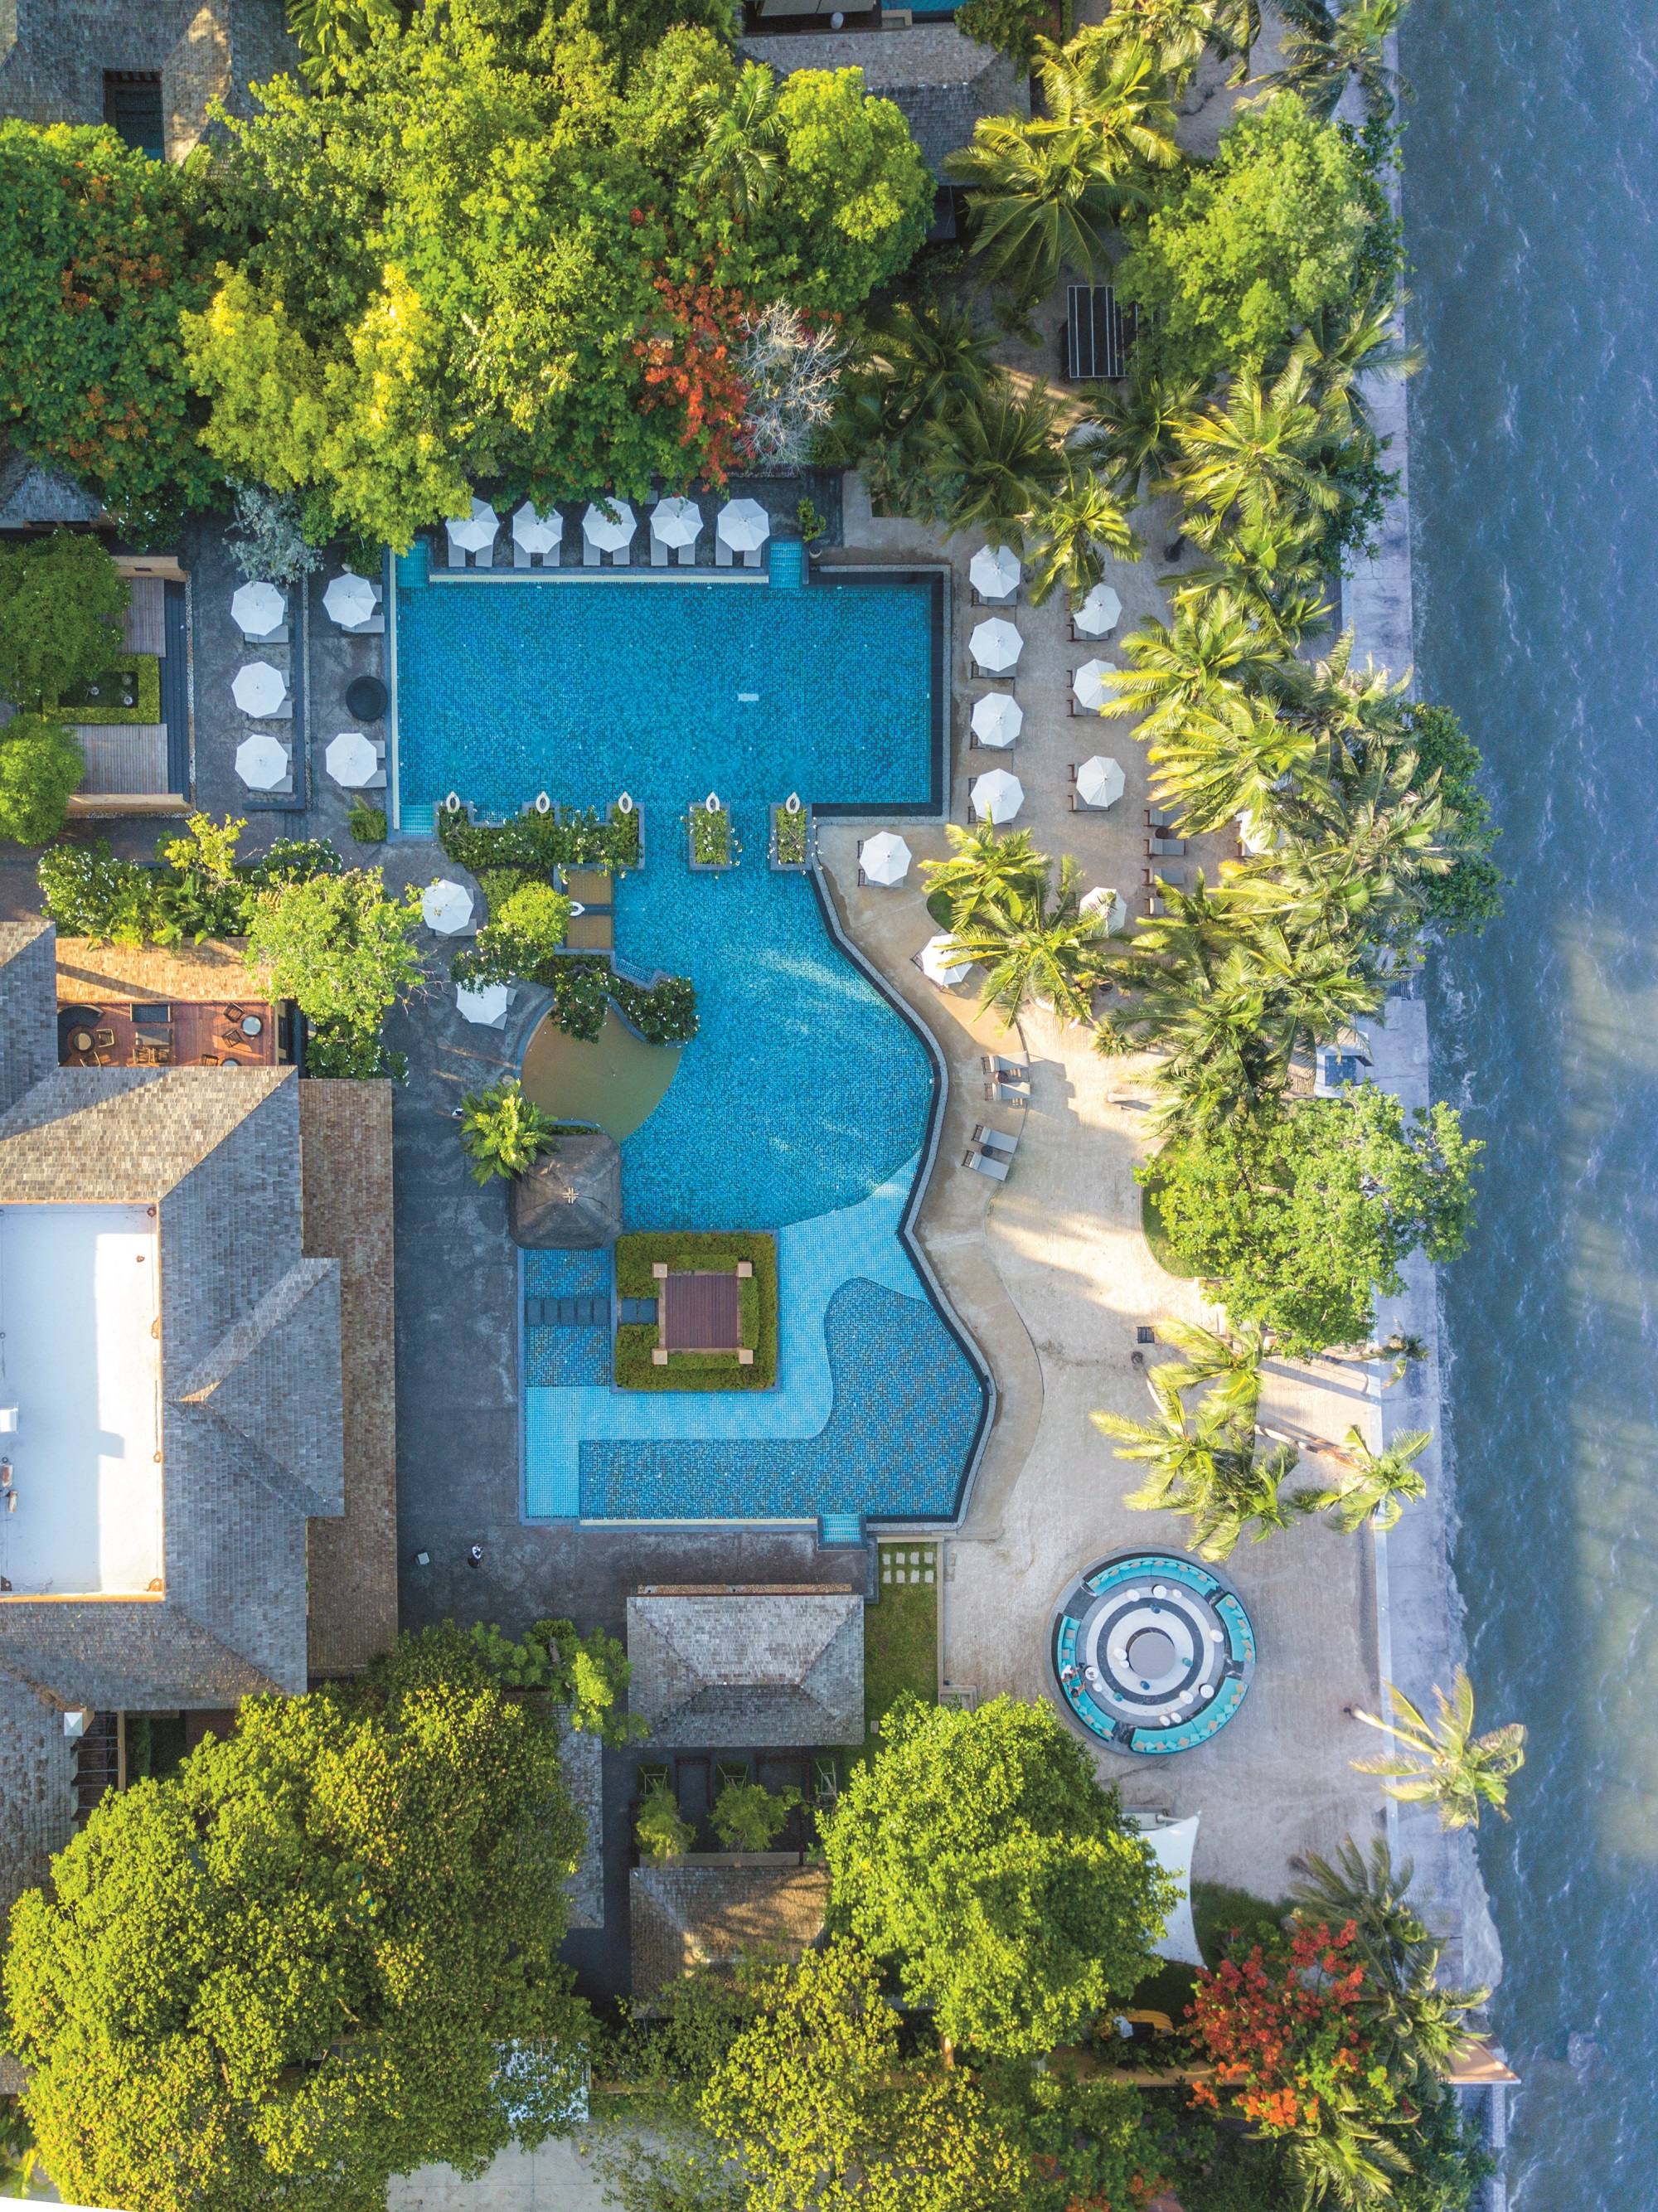 Formerly the Asara Villa & Suite Hua Hin, the beachfront resort has undergone a complete rebranding and refurbishment and is now called the Mövenpick Asara Resort & Spa Hua Hin. Click to enlarge.